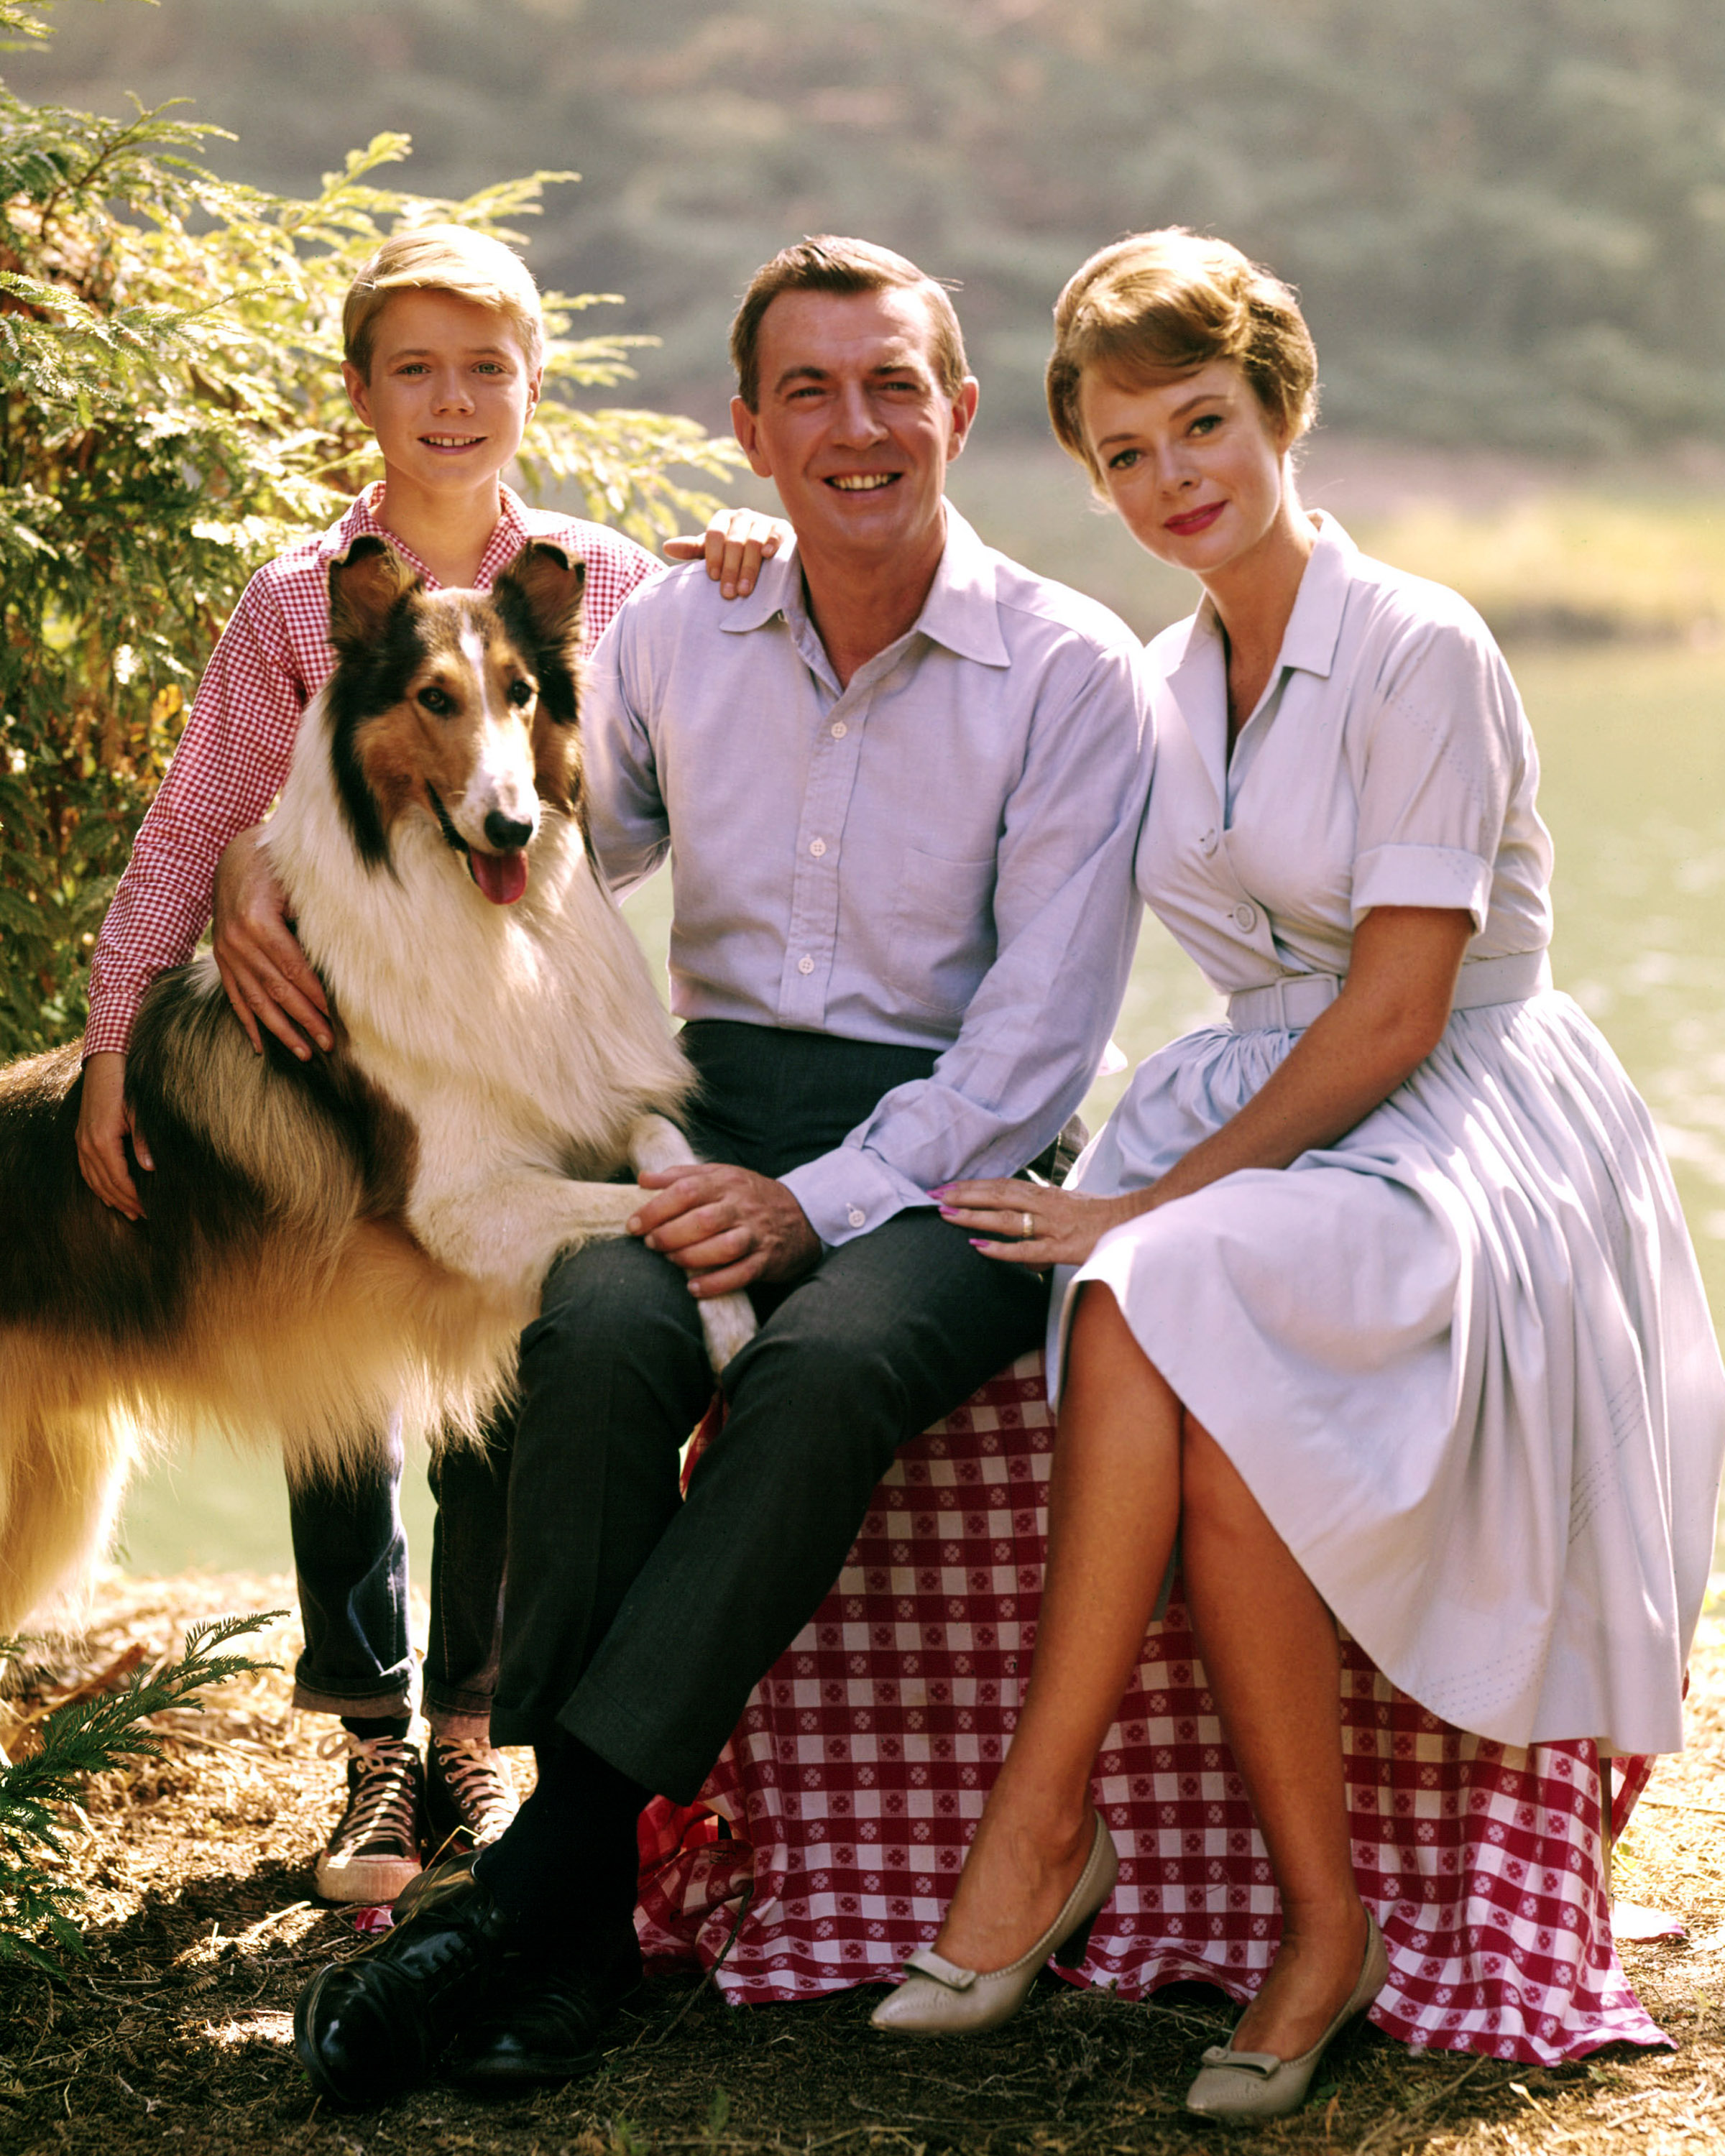 Lassie, Jon Provost, June Lockhart, and Hugh Reilly pose for a publicity portrait for "Lassie," circa 1955 | Source: Getty Images